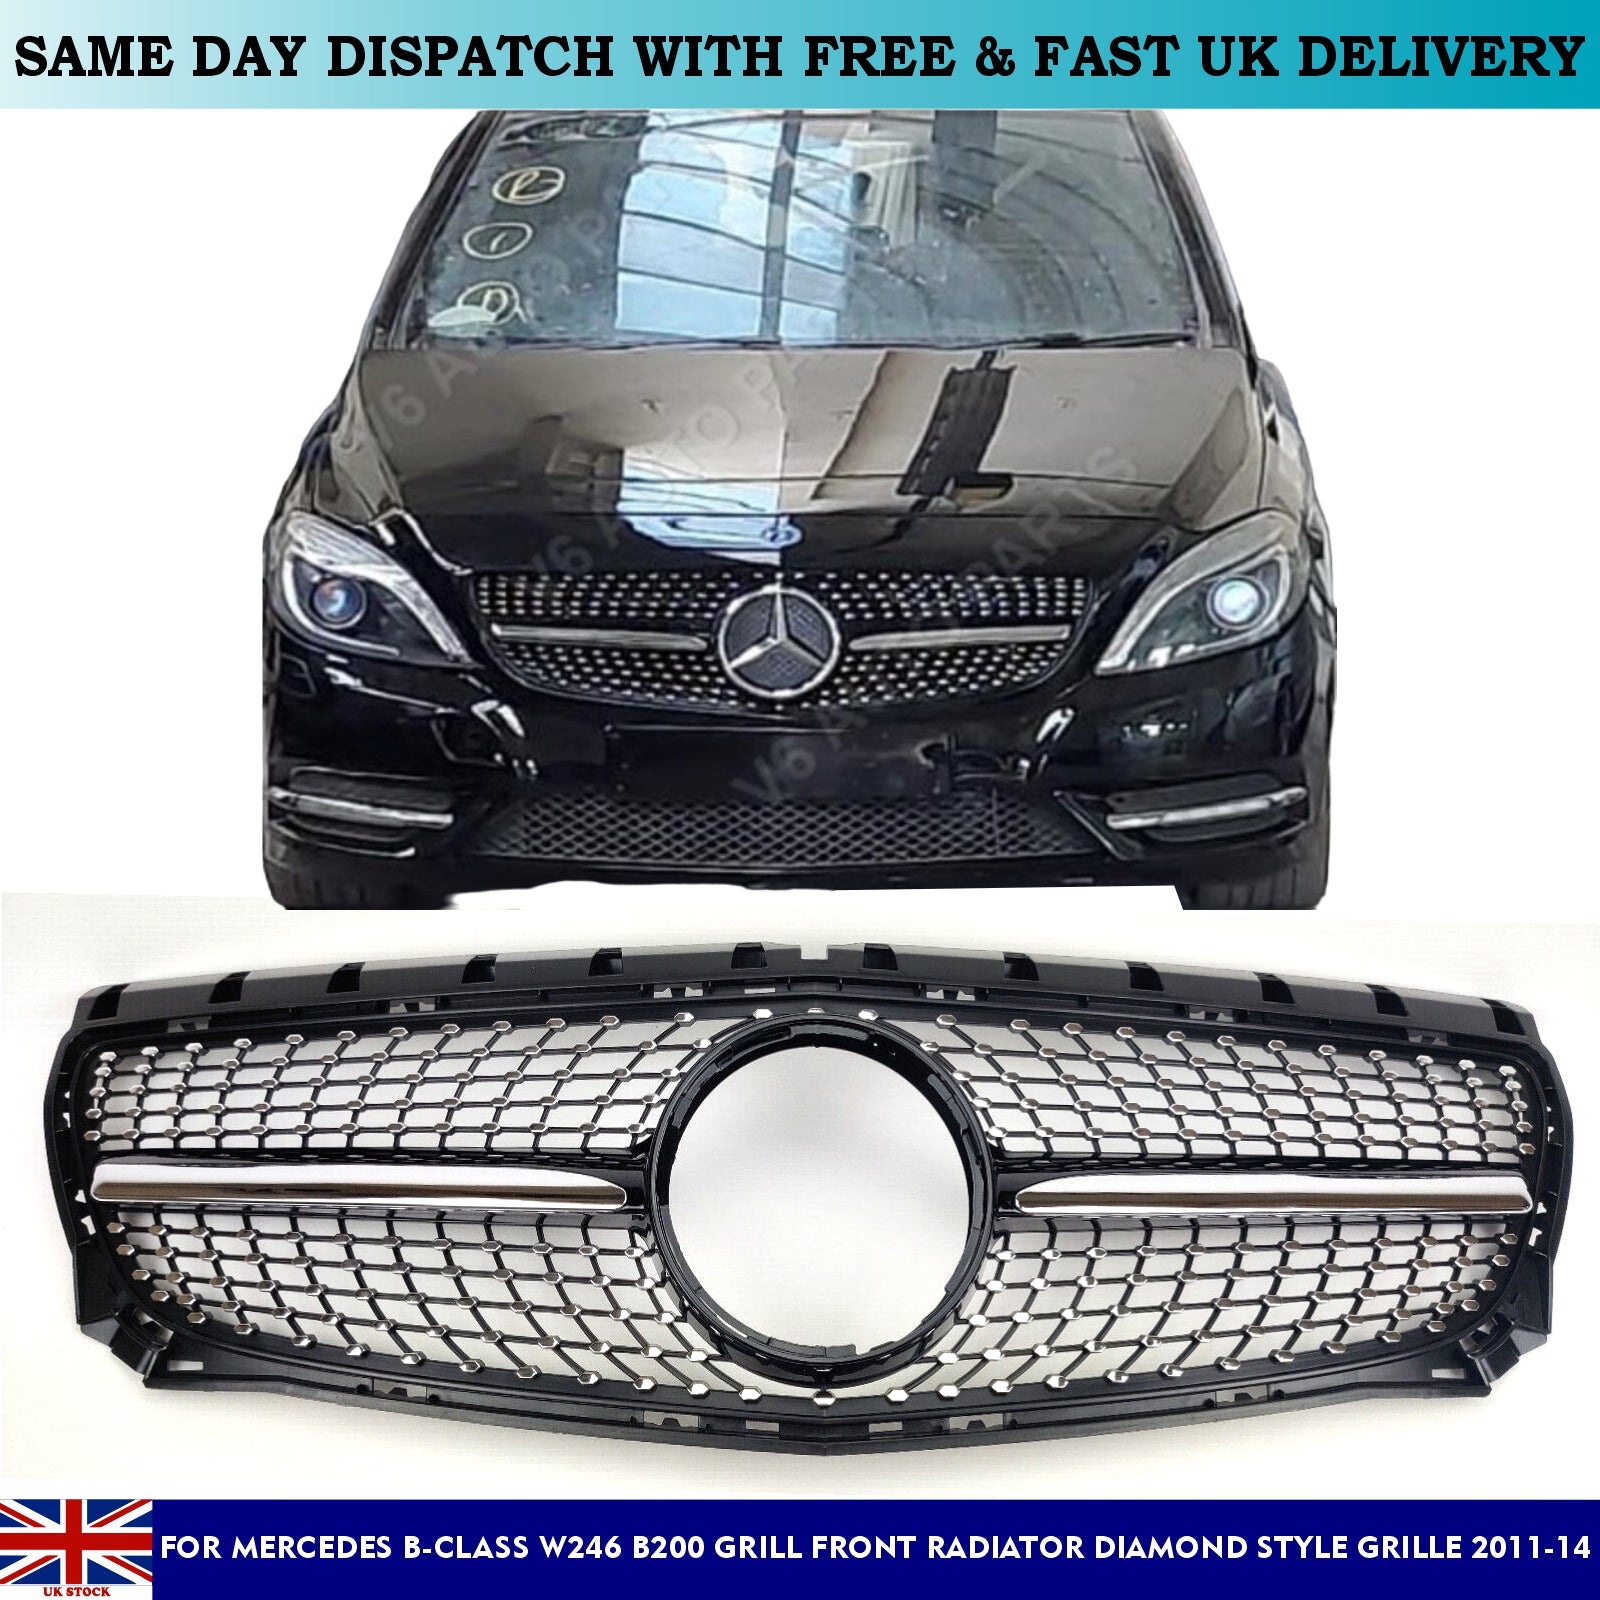 For Mercedes B-Class W246 B180 B250 Grill Front Radiator Diamond Grille 2011-14